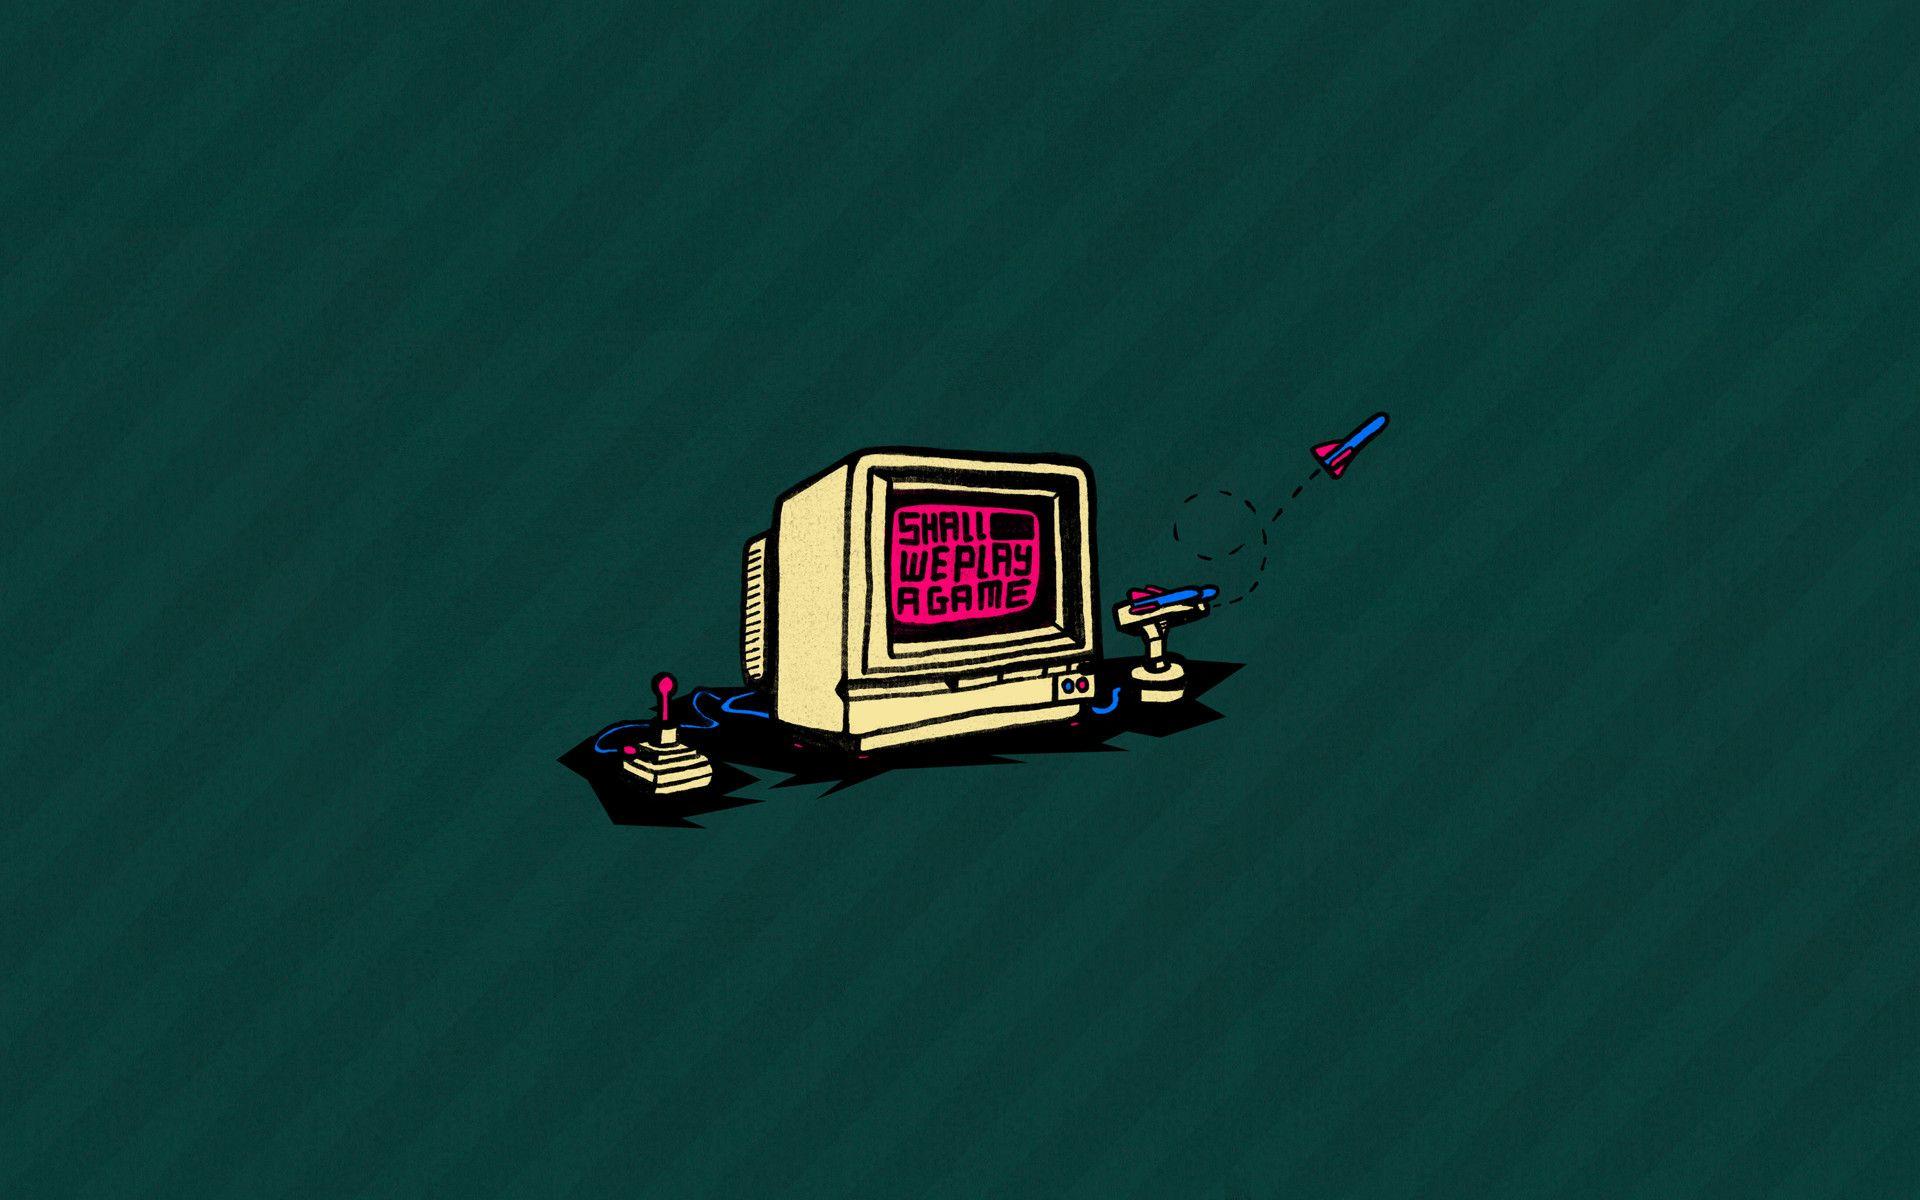 Game Over Aesthetic Wallpapers - Top Free Game Over Aesthetic